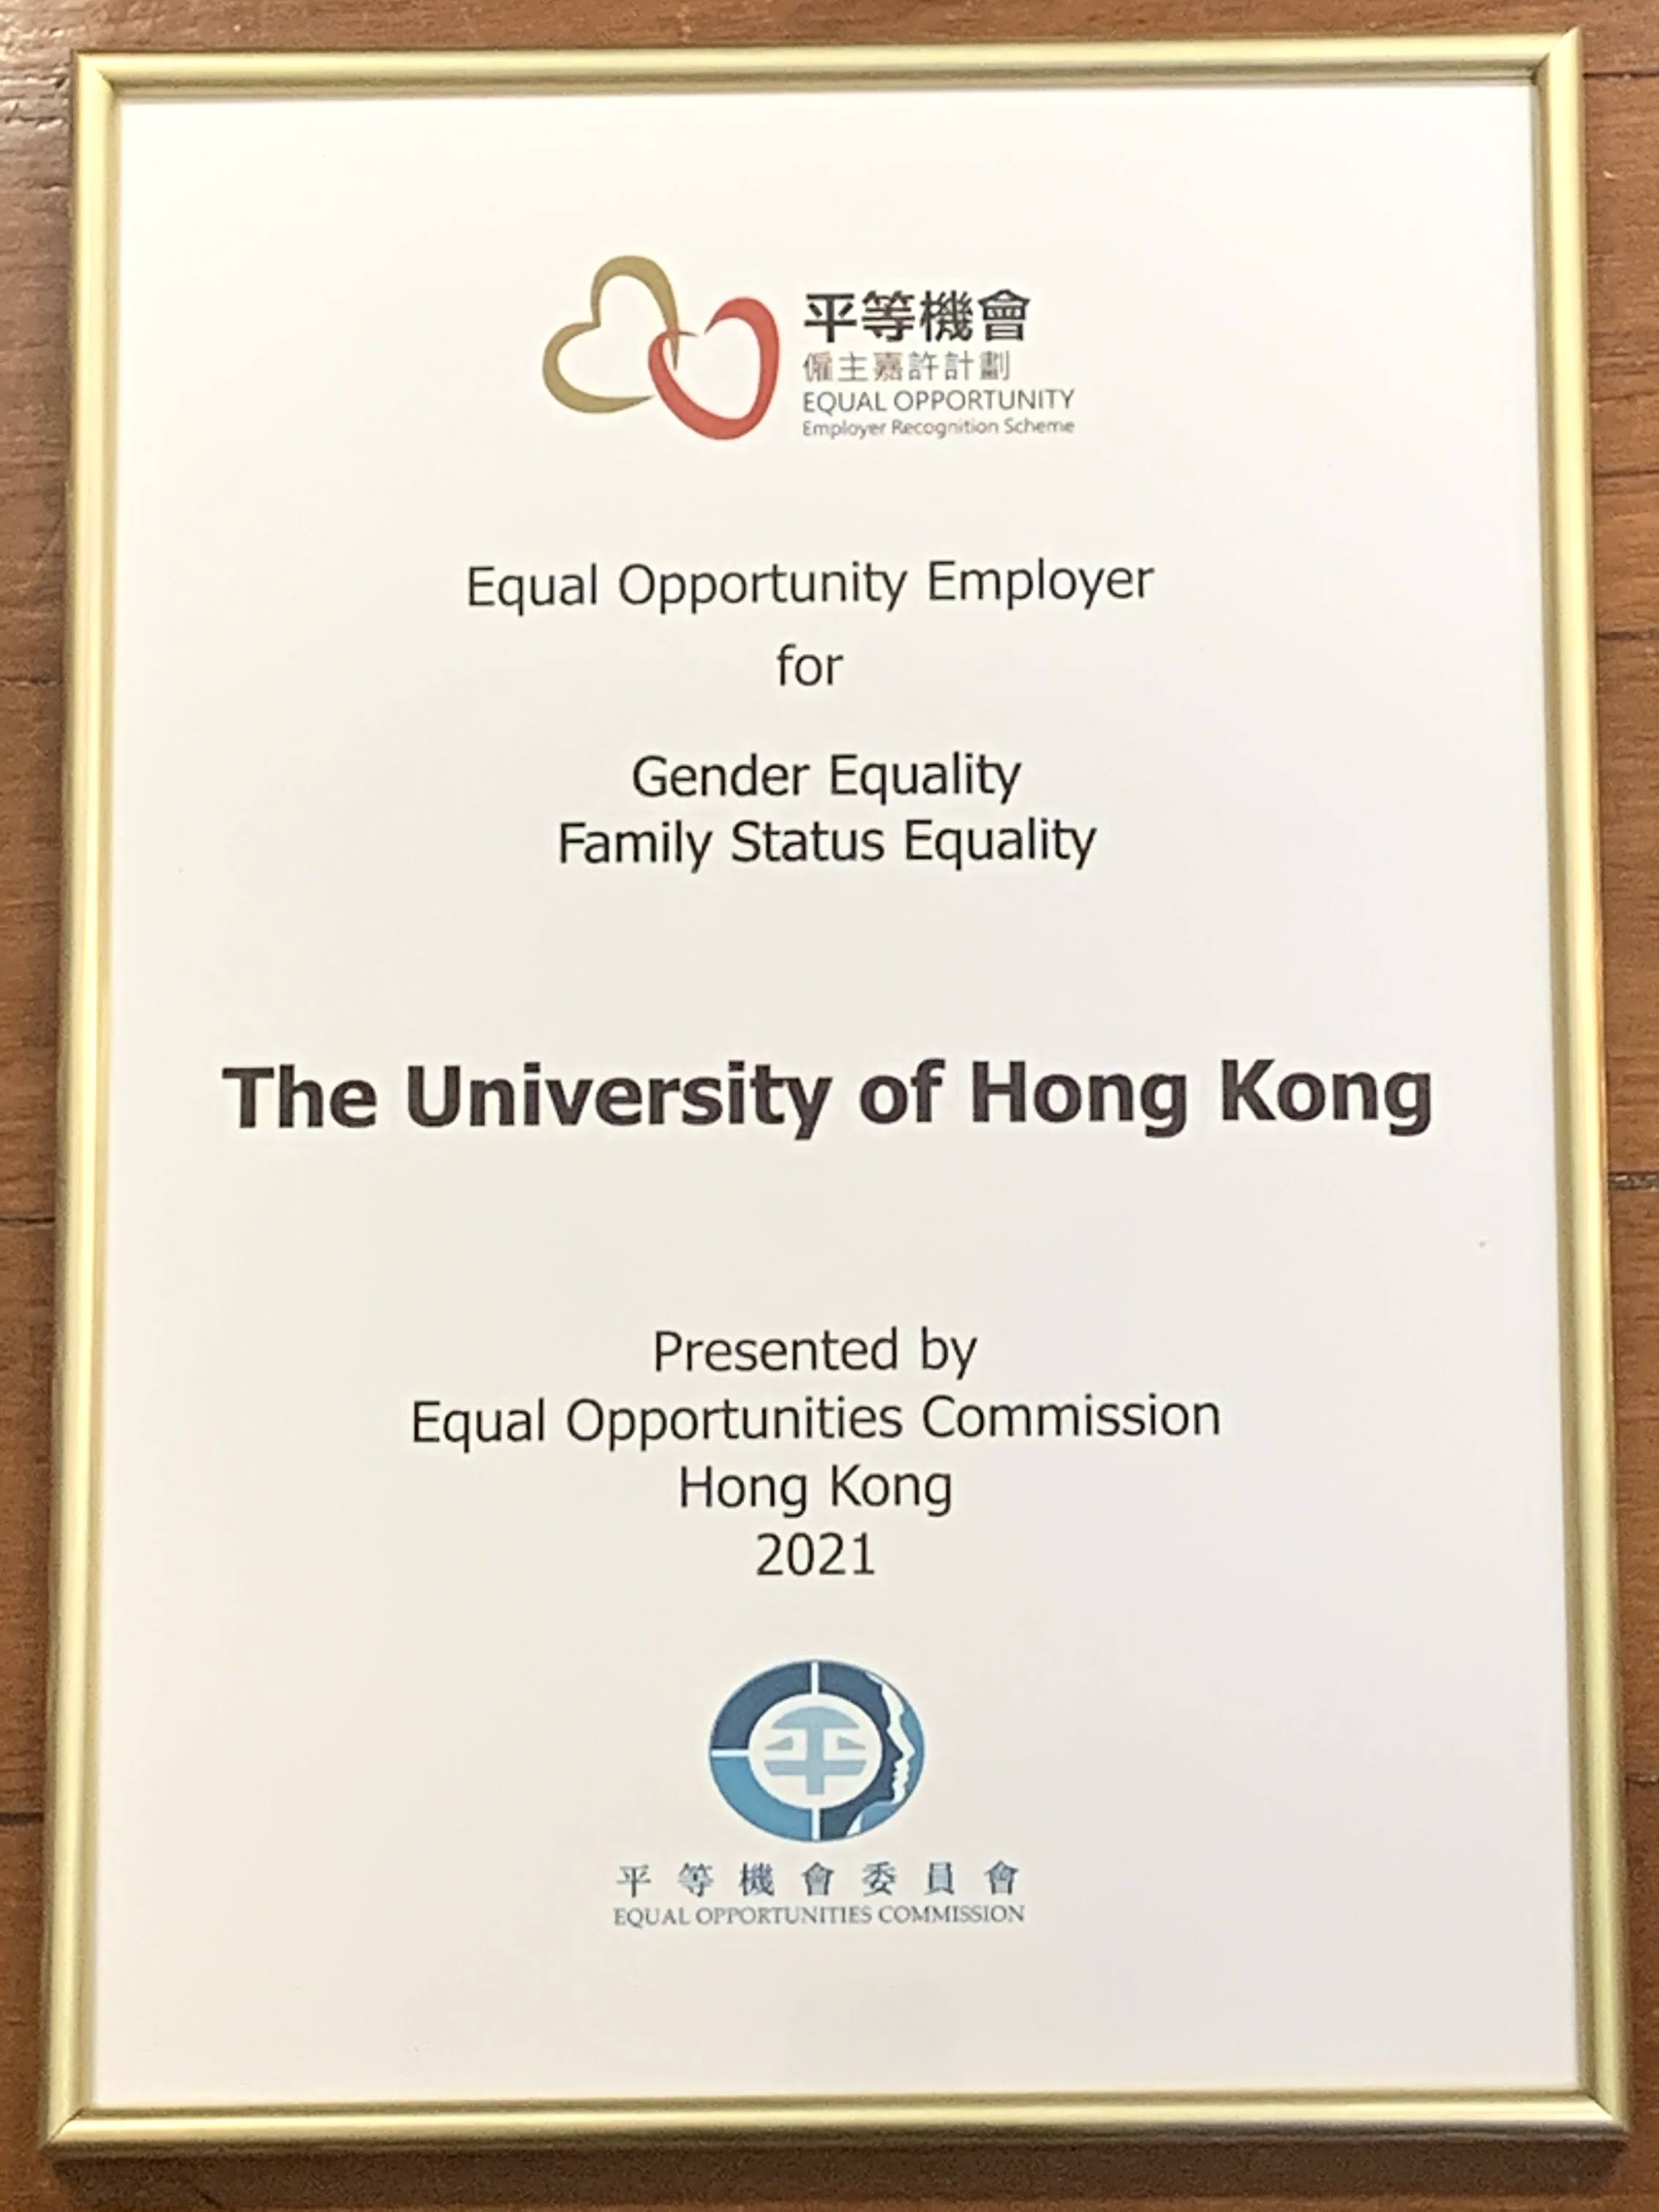 The Certificate of Equal Opportunity Employer Award 2021